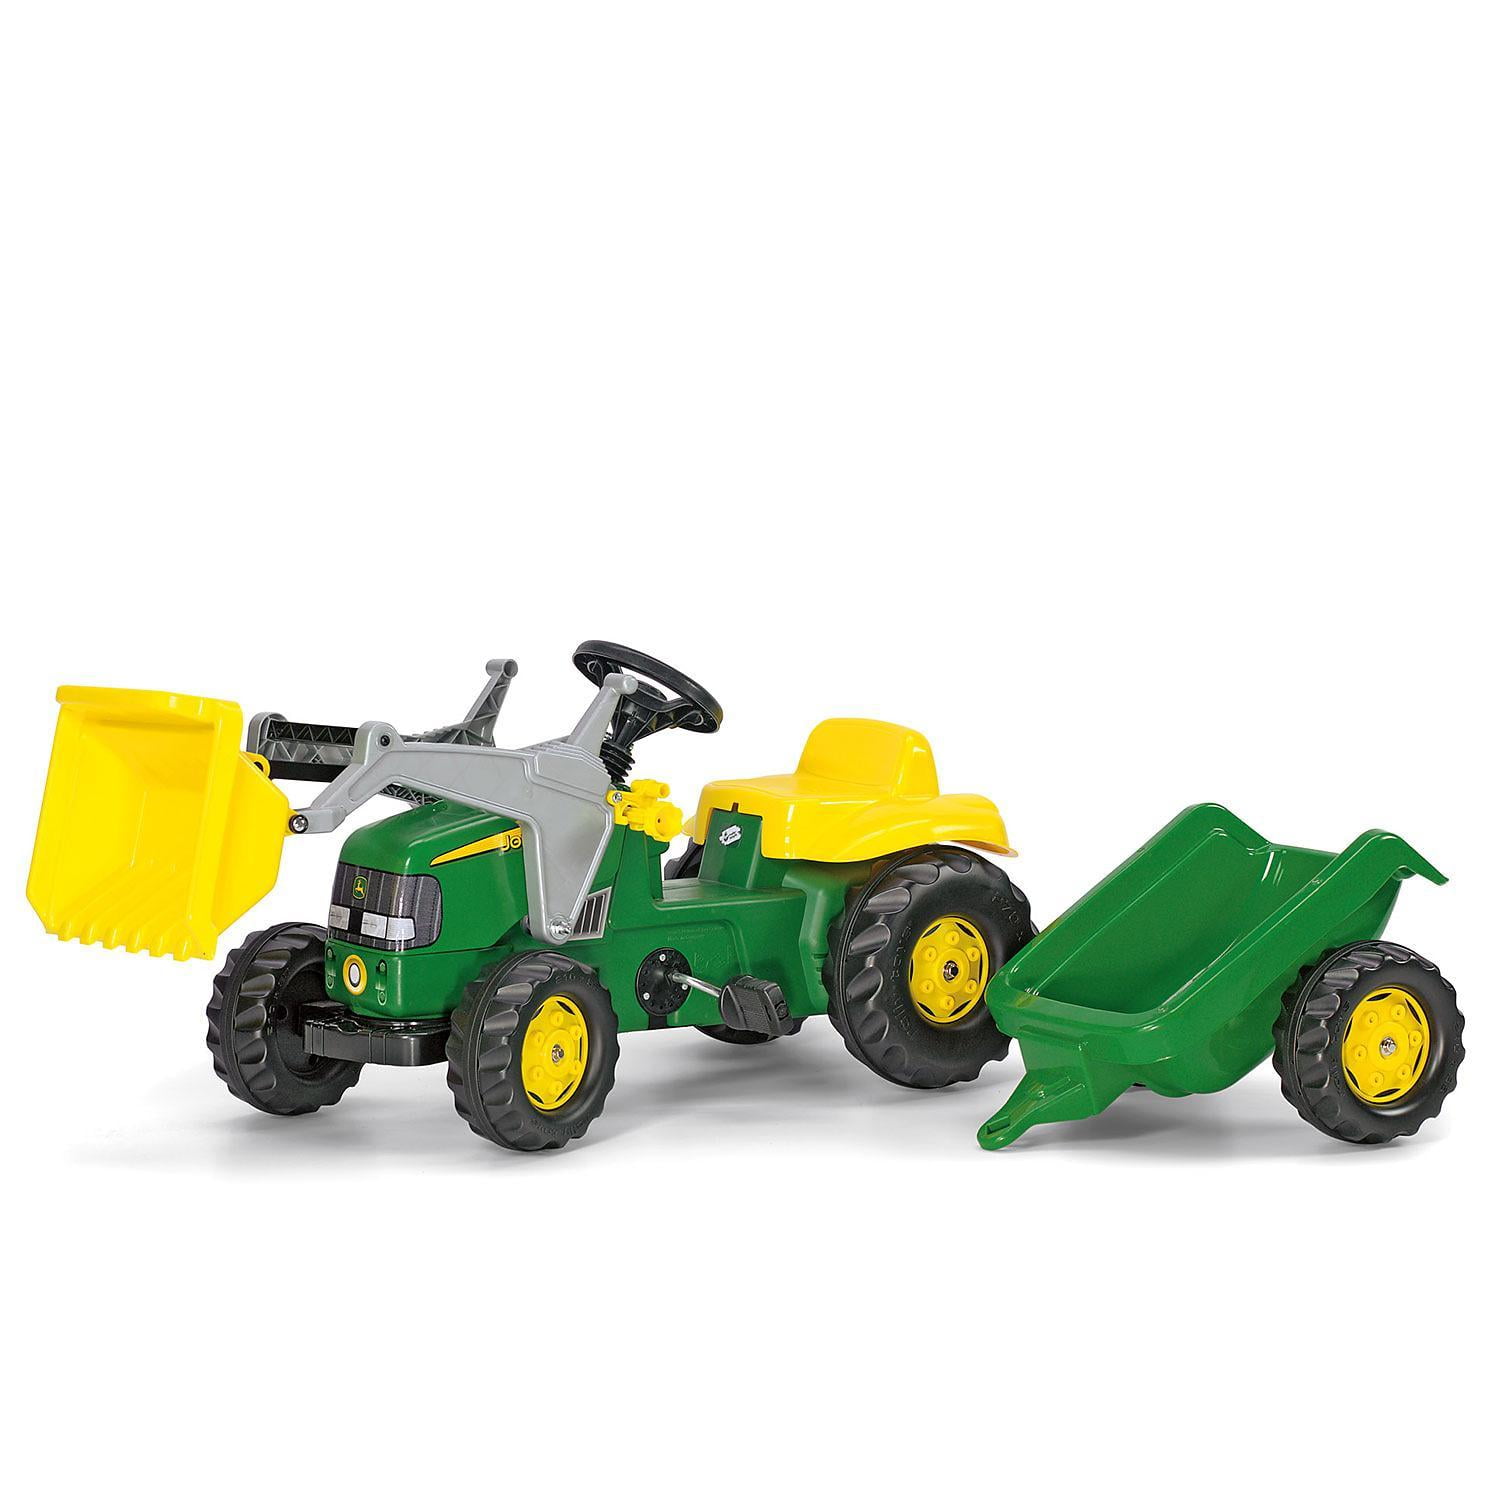 NEW JOHN DEERE MIGHTY MOVERS SEMI LAUNCHER TRACTOR LOADER NEW IN BOX 